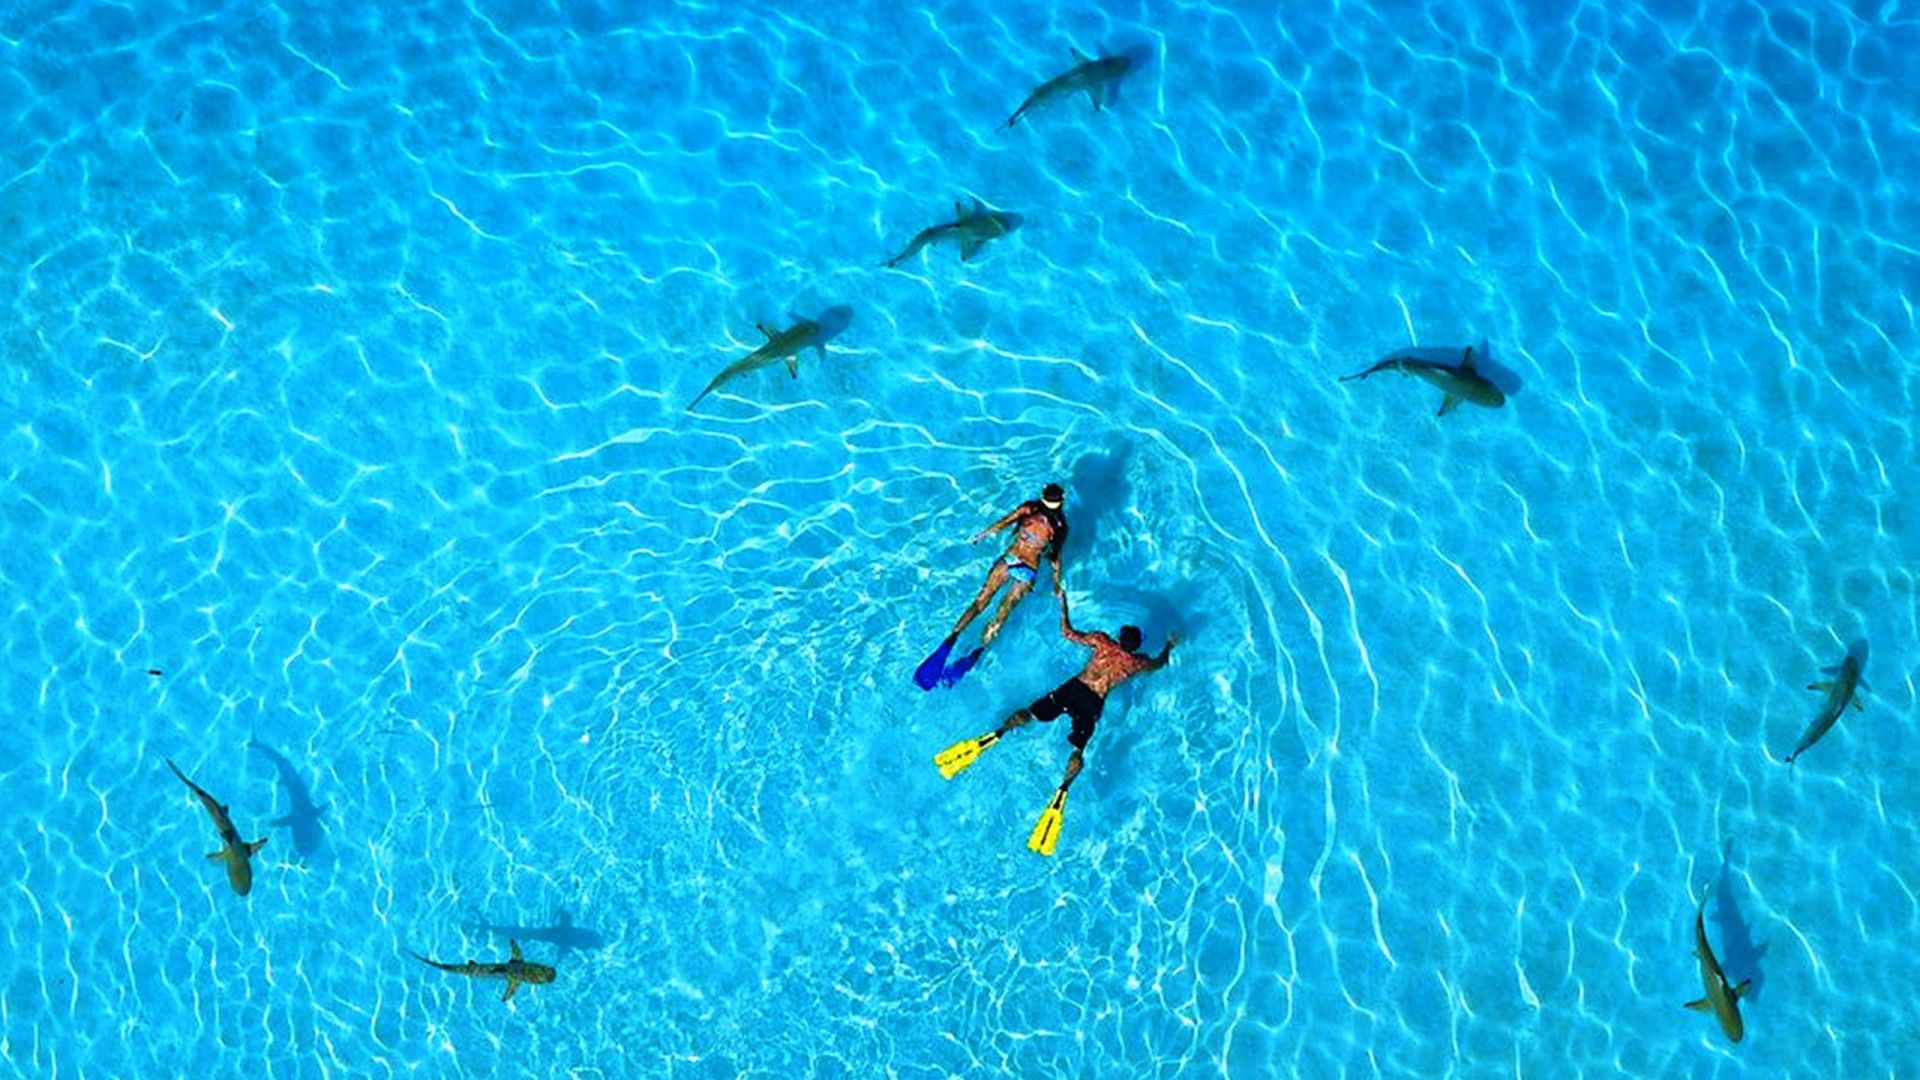 Download 1920x1080 Snorkeling with Sharks in French Polynesia